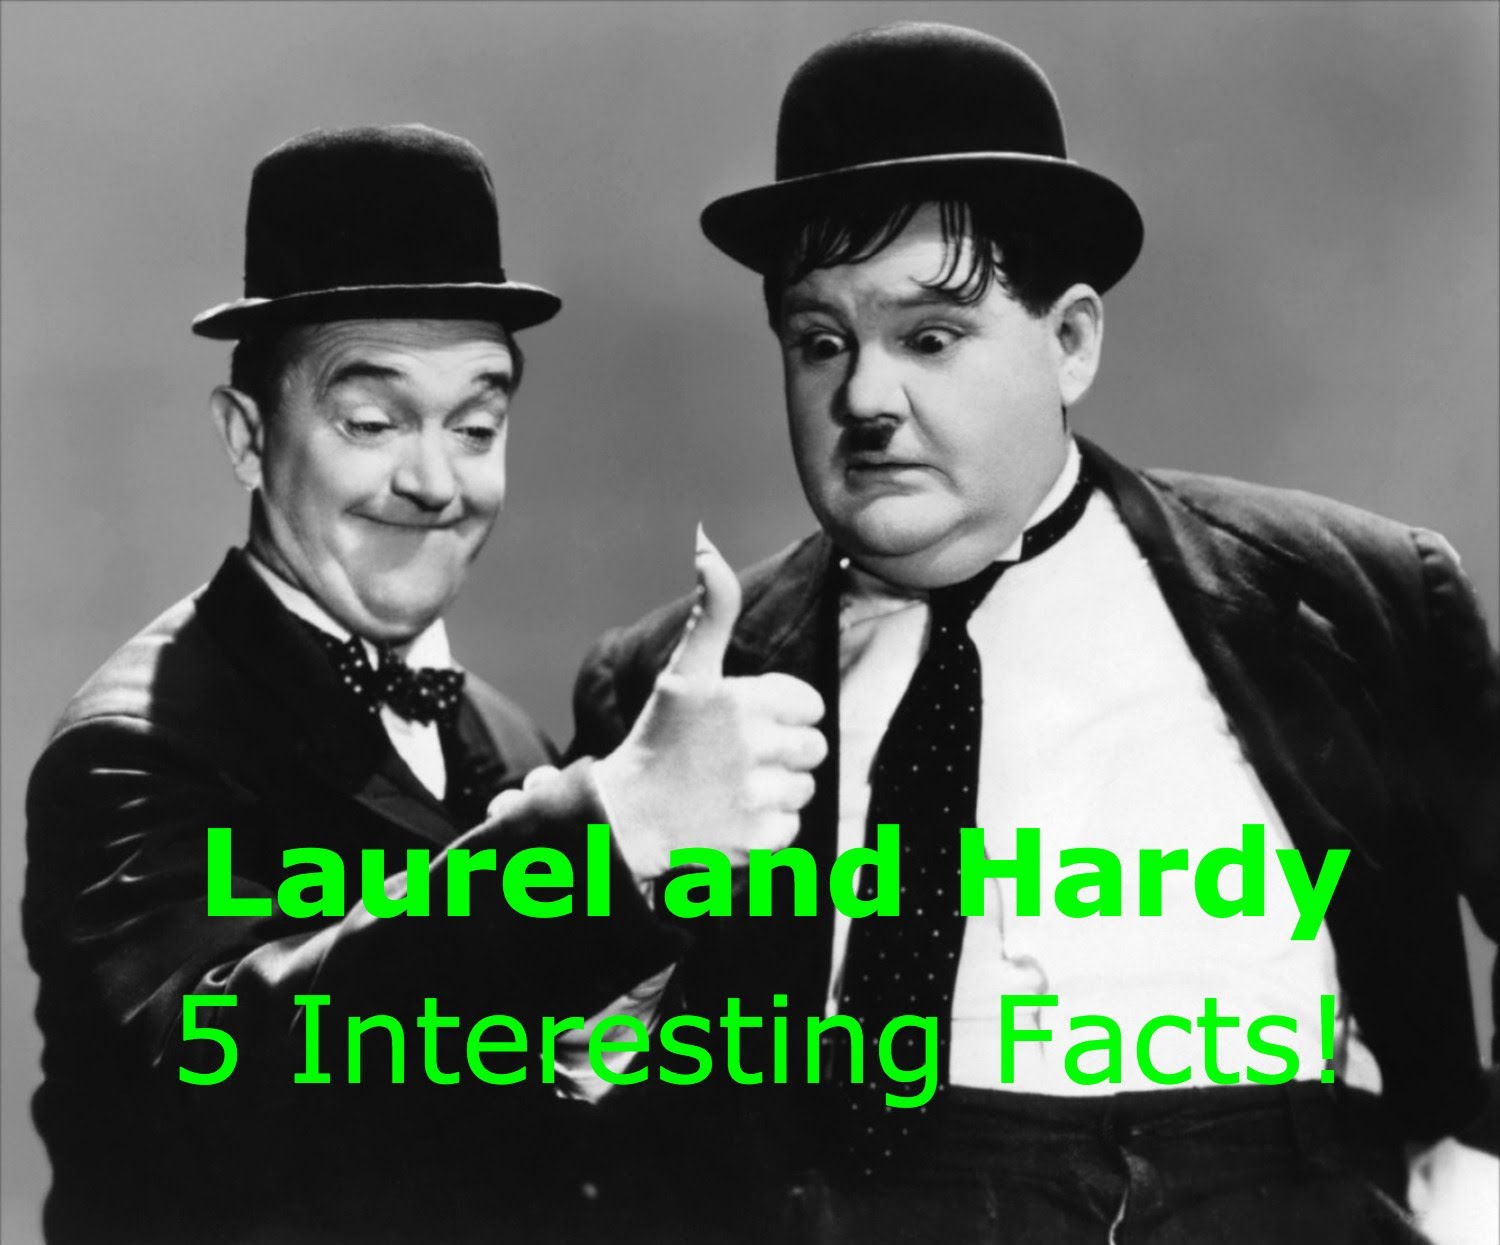 laurel-and-hardy-wallpapers